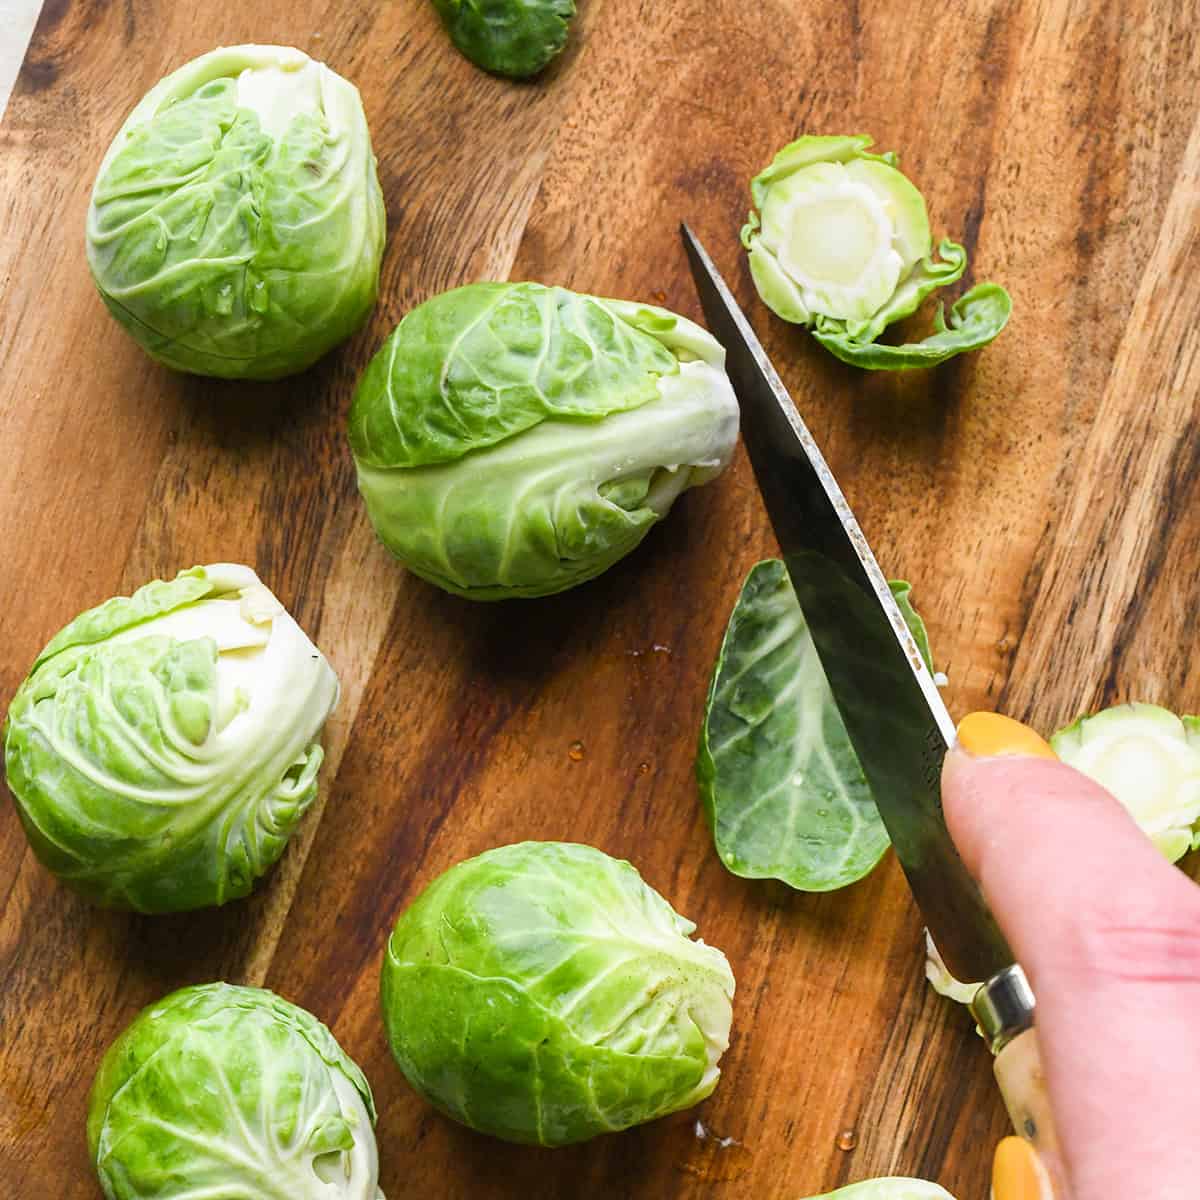 trimming brussels sprouts to make roasted brussels sprouts